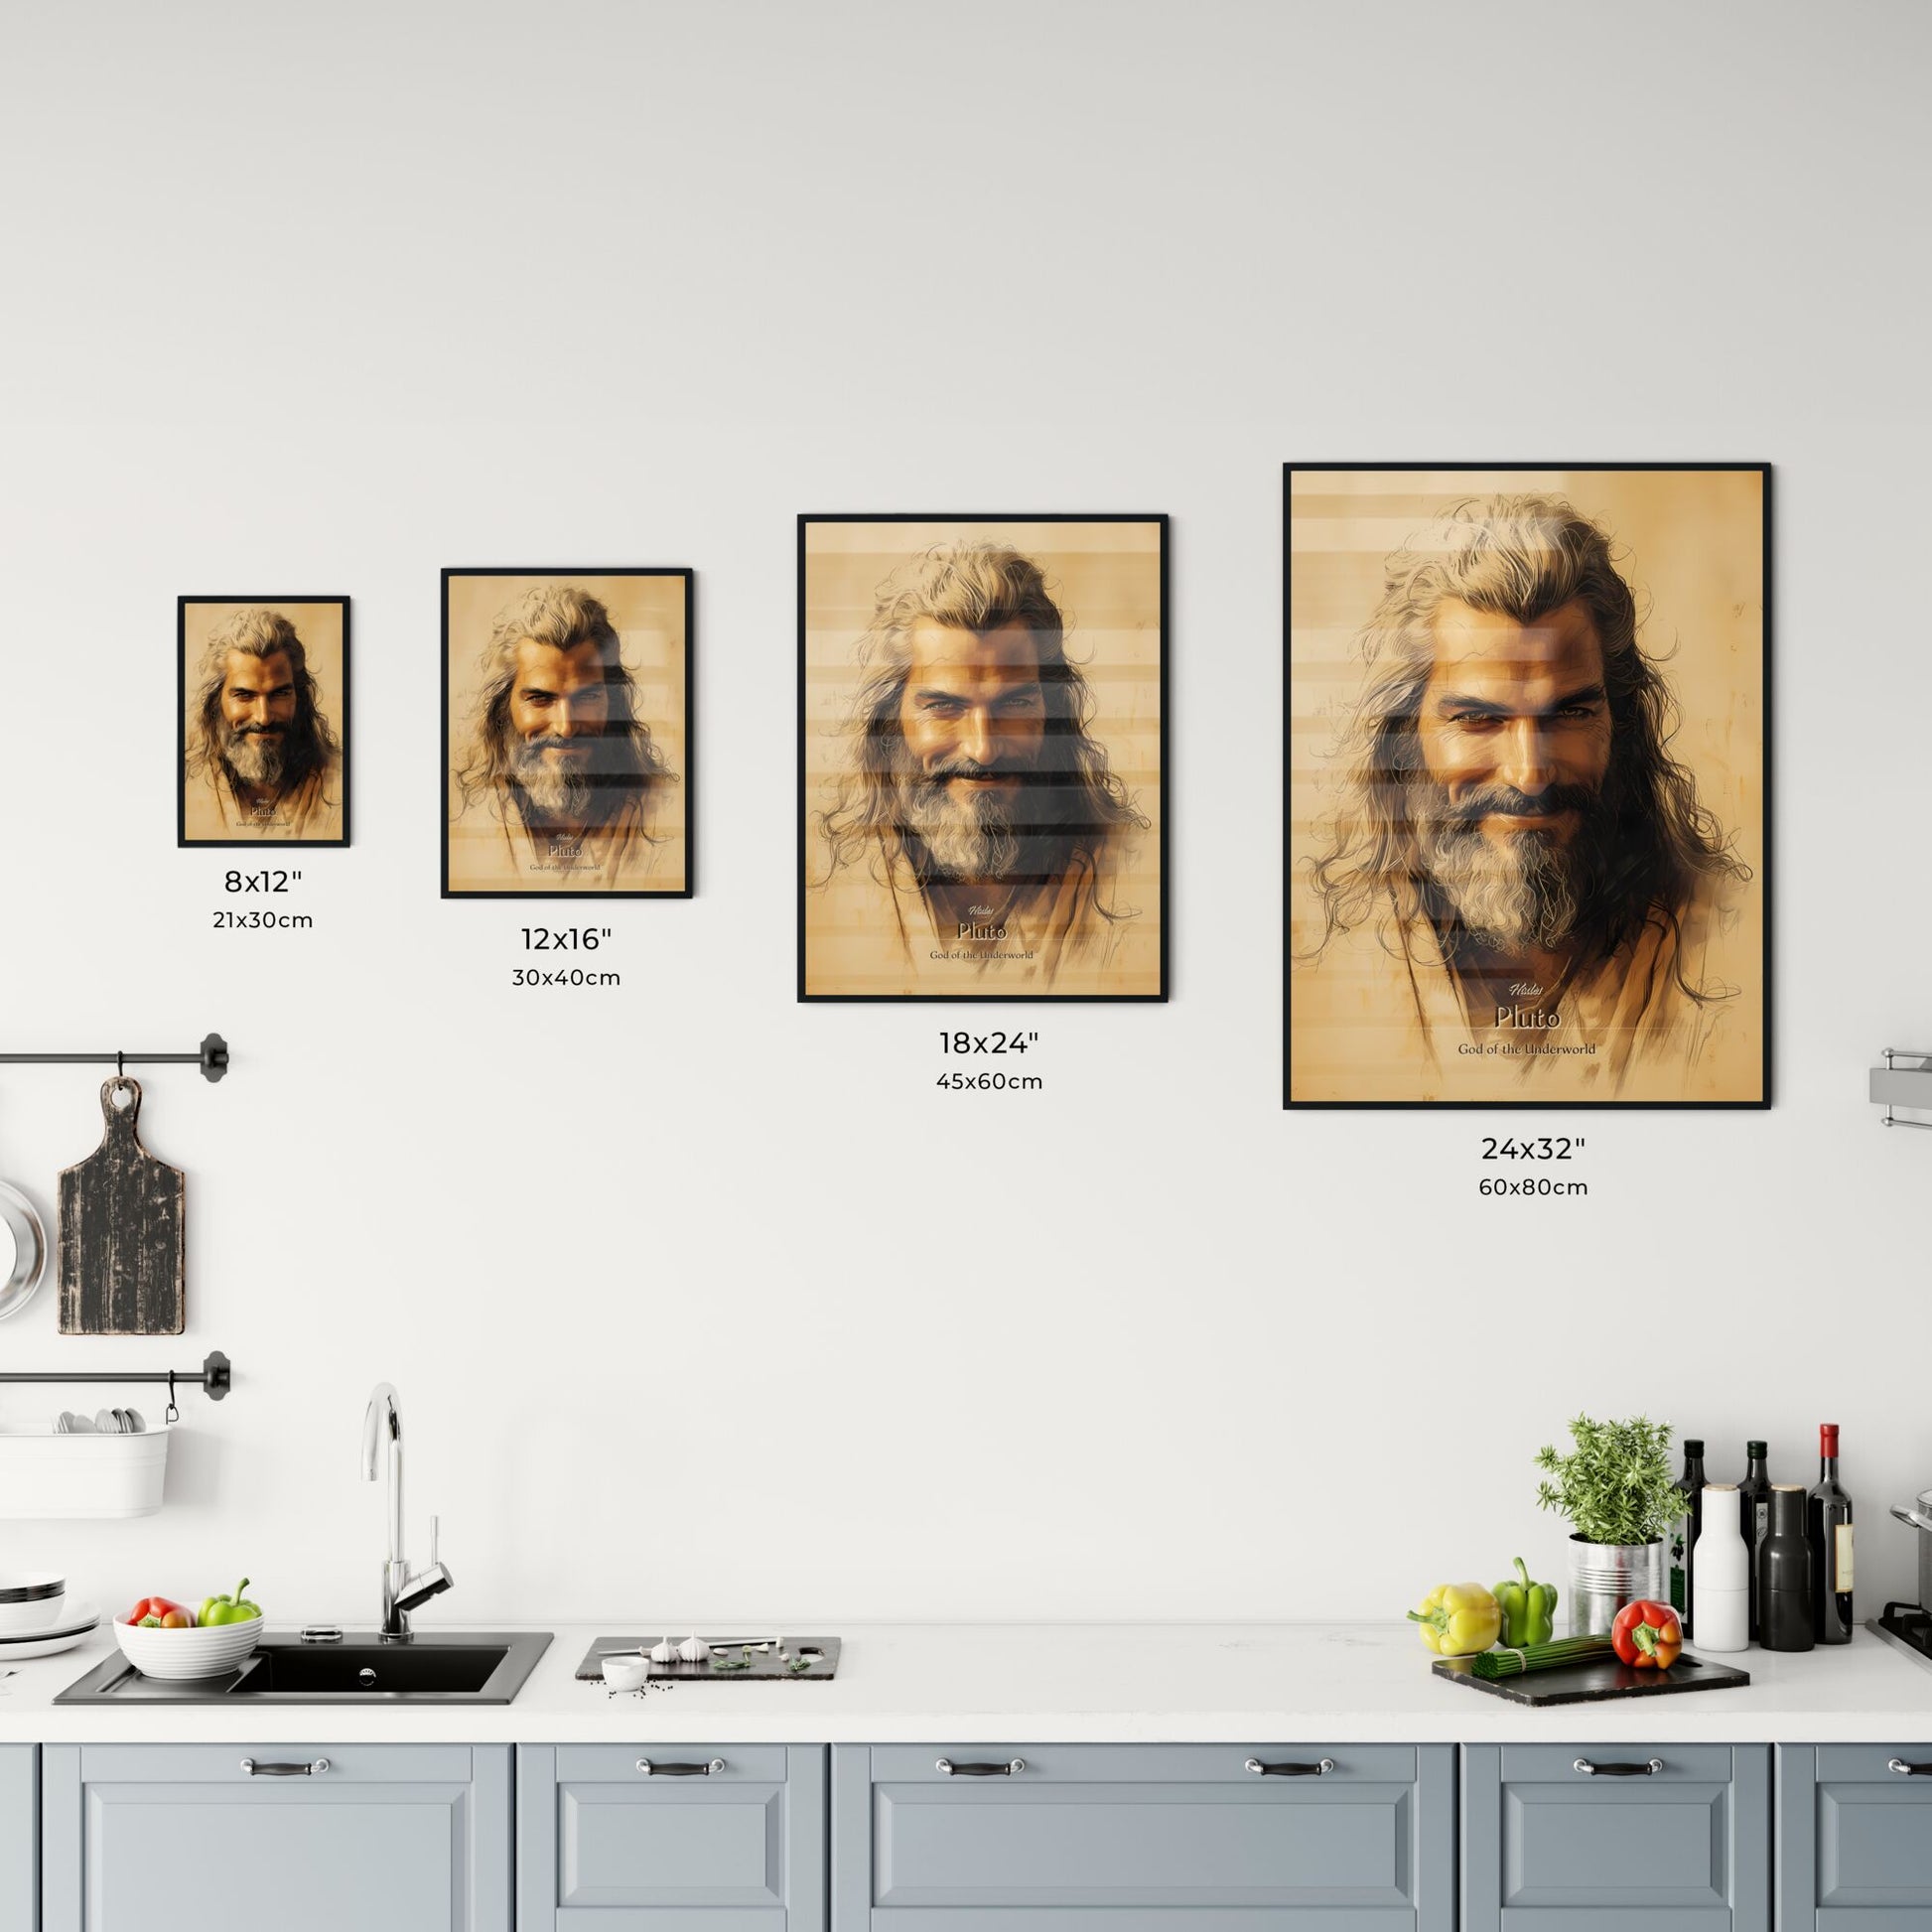 Hades, Pluto, God of the Underworld, A Poster of a man with long hair and beard Default Title